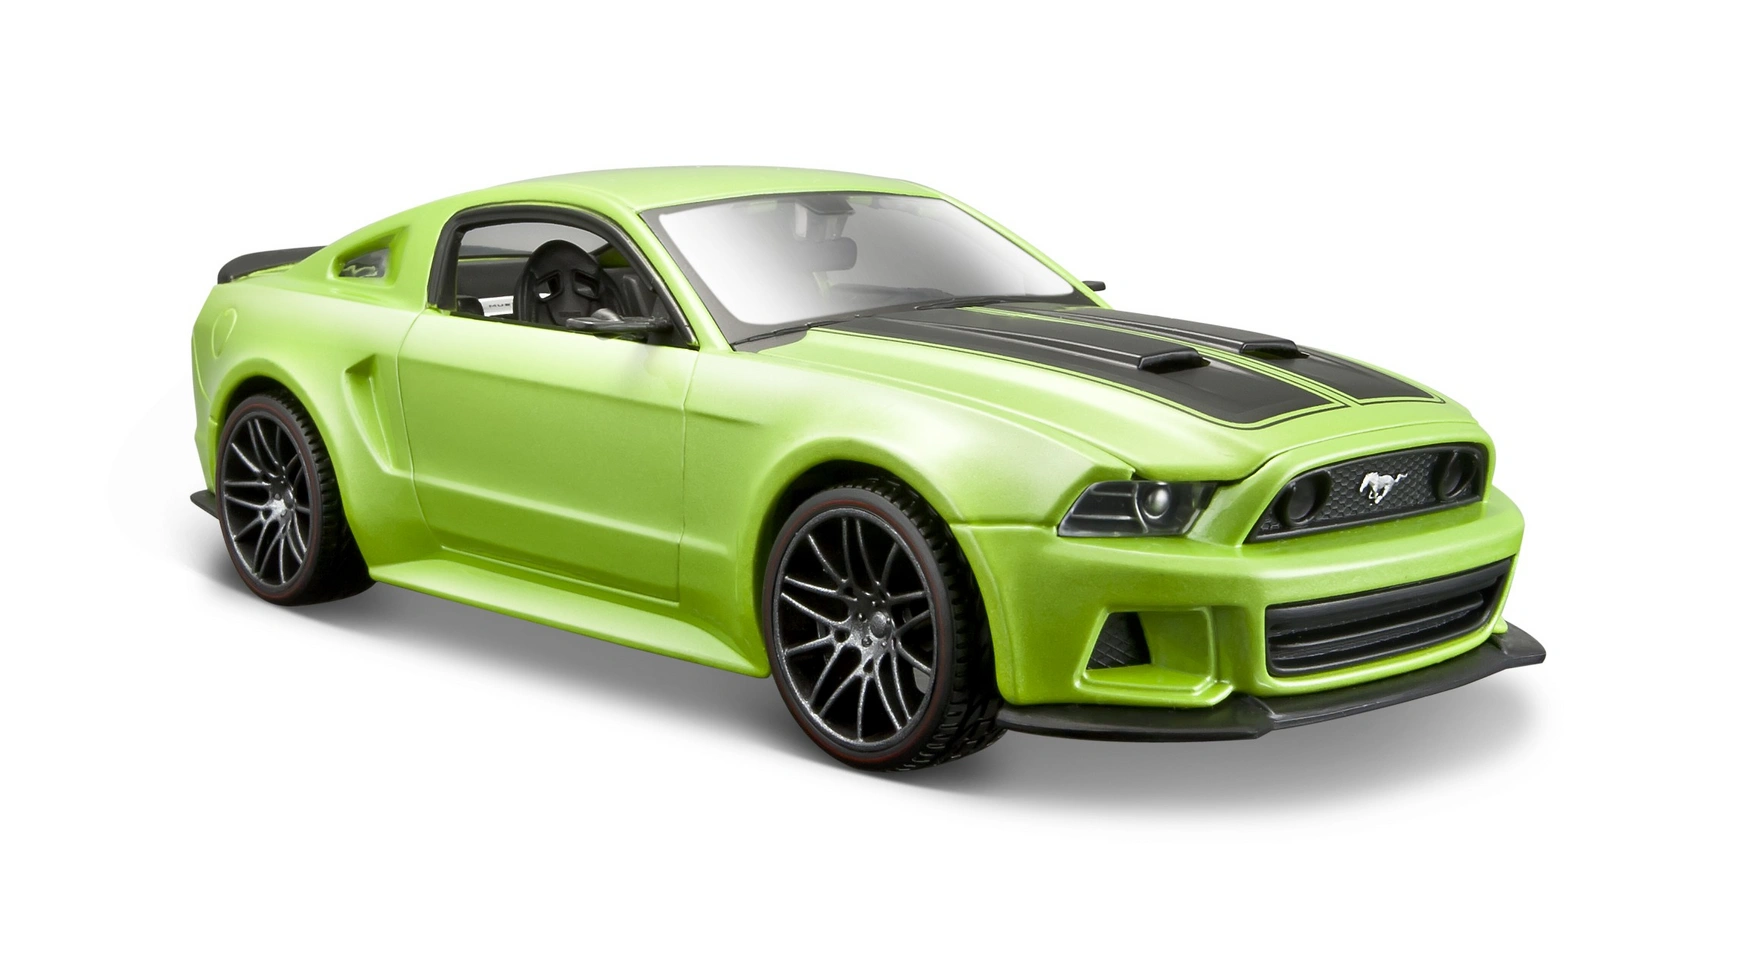 Maisto 1:24 Ford Mustang Street Racer 14 1 36 ford mustang 2015 alloy diecast collectible car toy office home decorative souvenir ornament